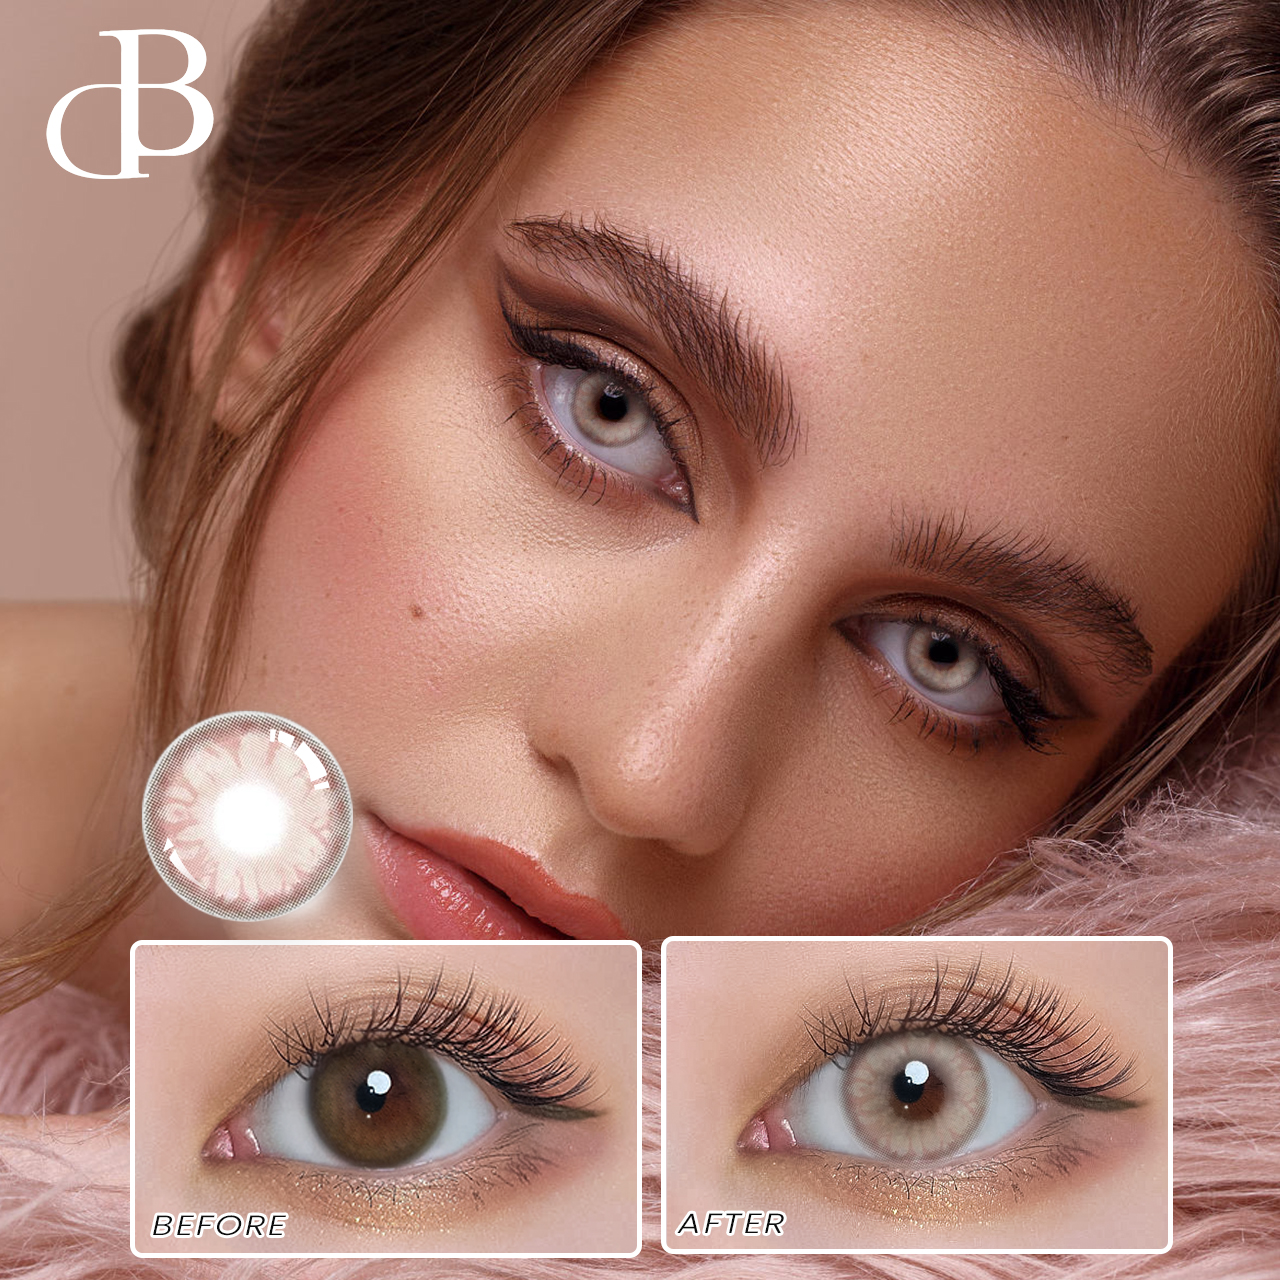 DB Yearly color sensual beauty lenses branclear color contact contact lenses